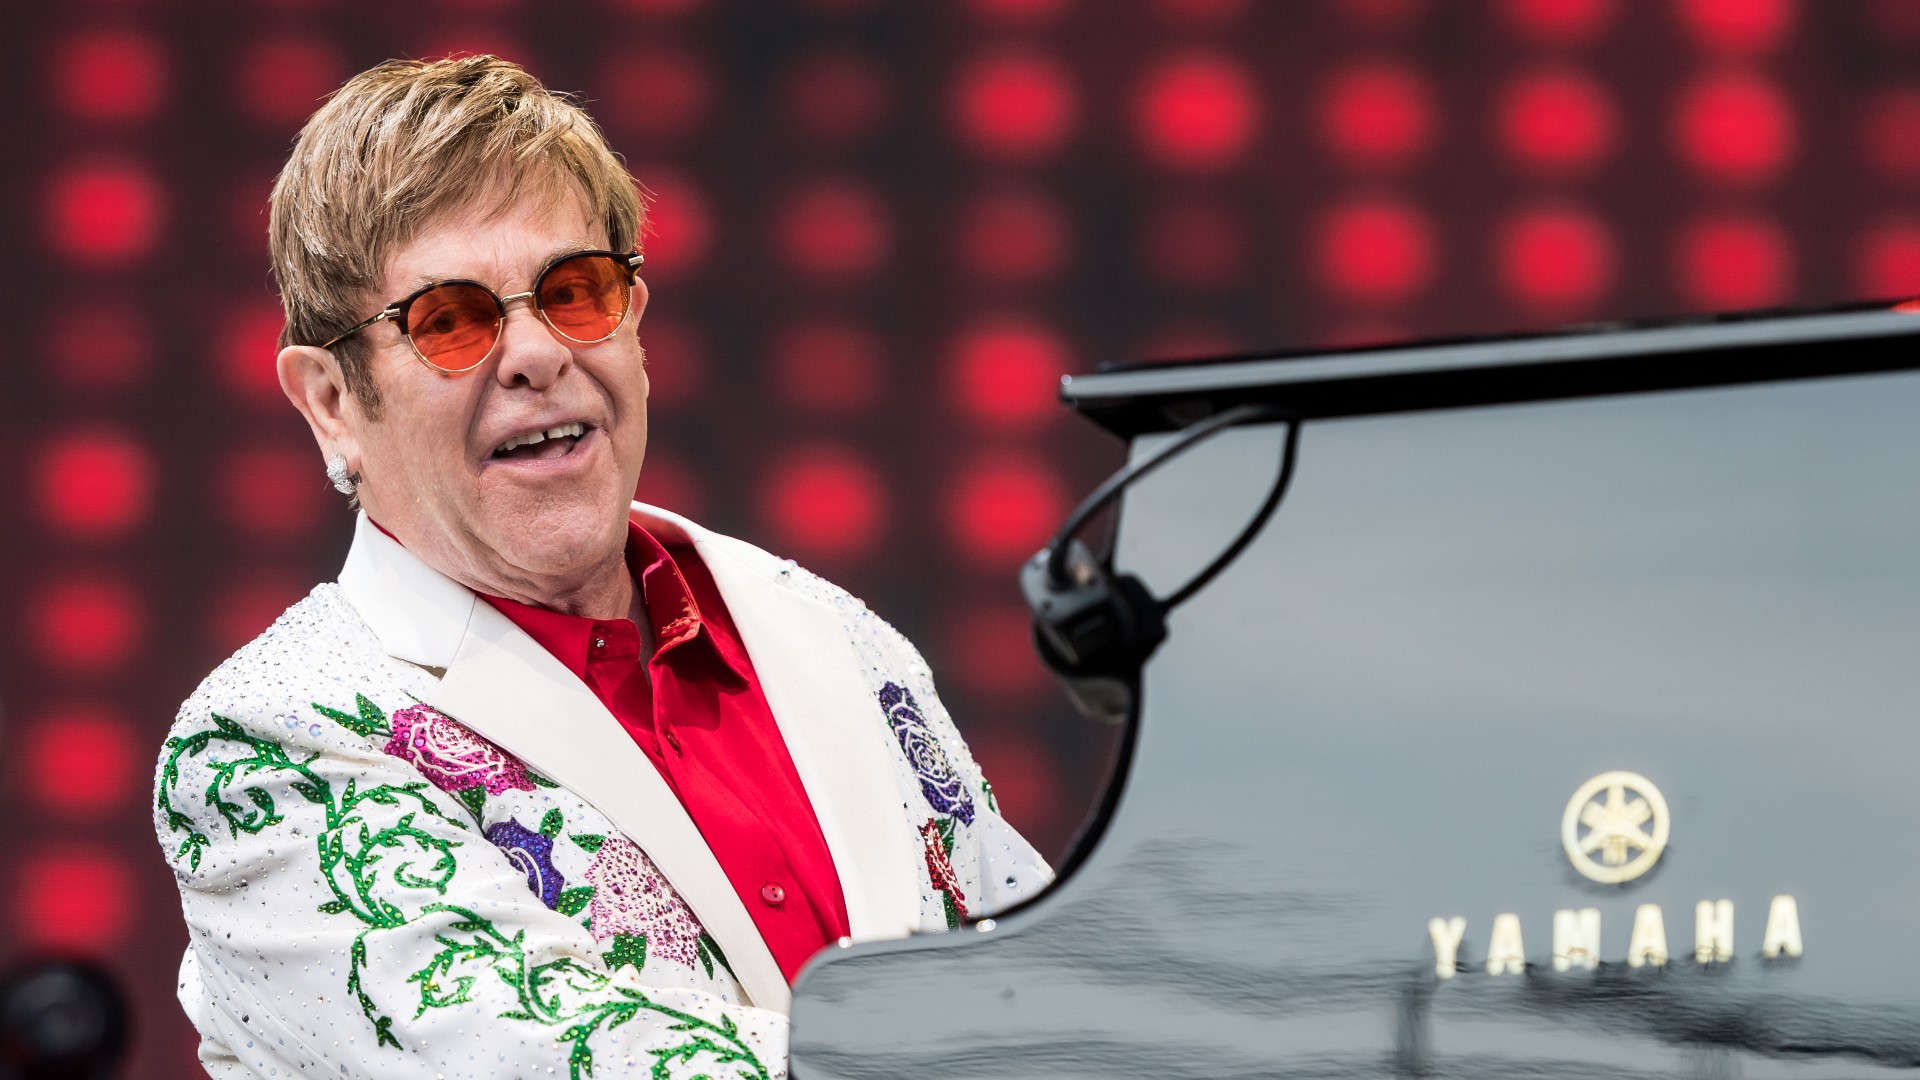 Legendary singer-songwriter Elton John announced that he’s adding two more concert dates in Atlanta for his “Farewell Yellow Brick Road” tour.